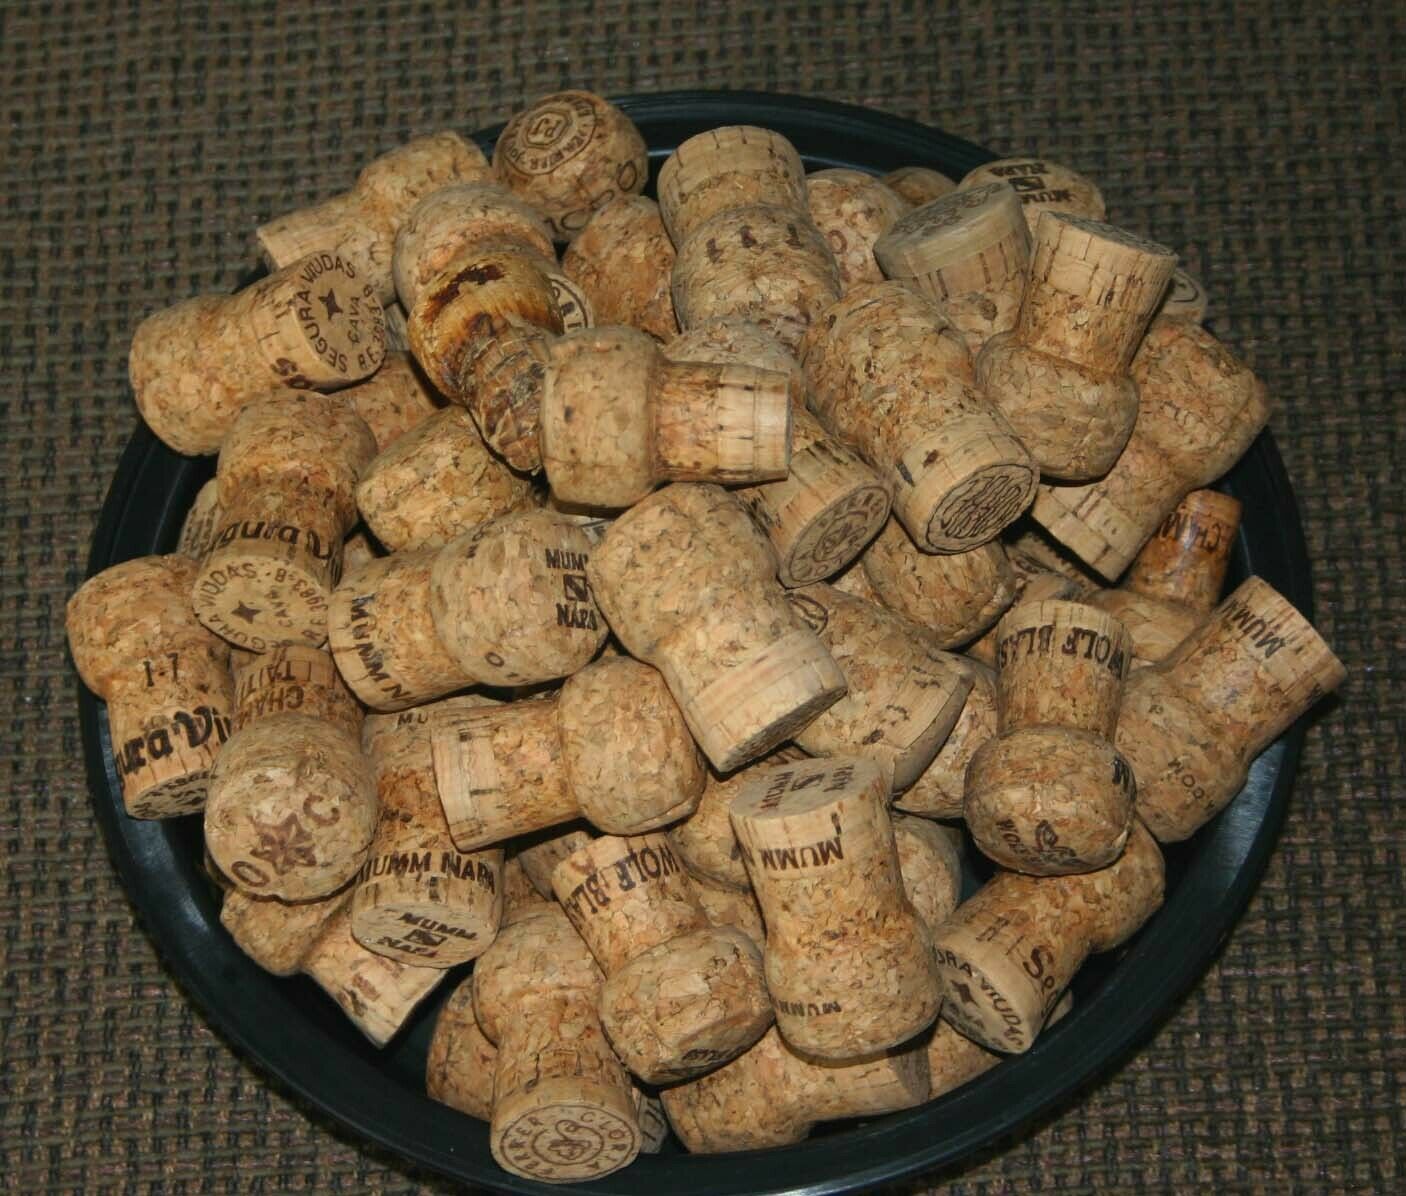 30+ Champagne Sparkling Wine Corks Stoppers Bottle Toppers-crafts Wedding Party!